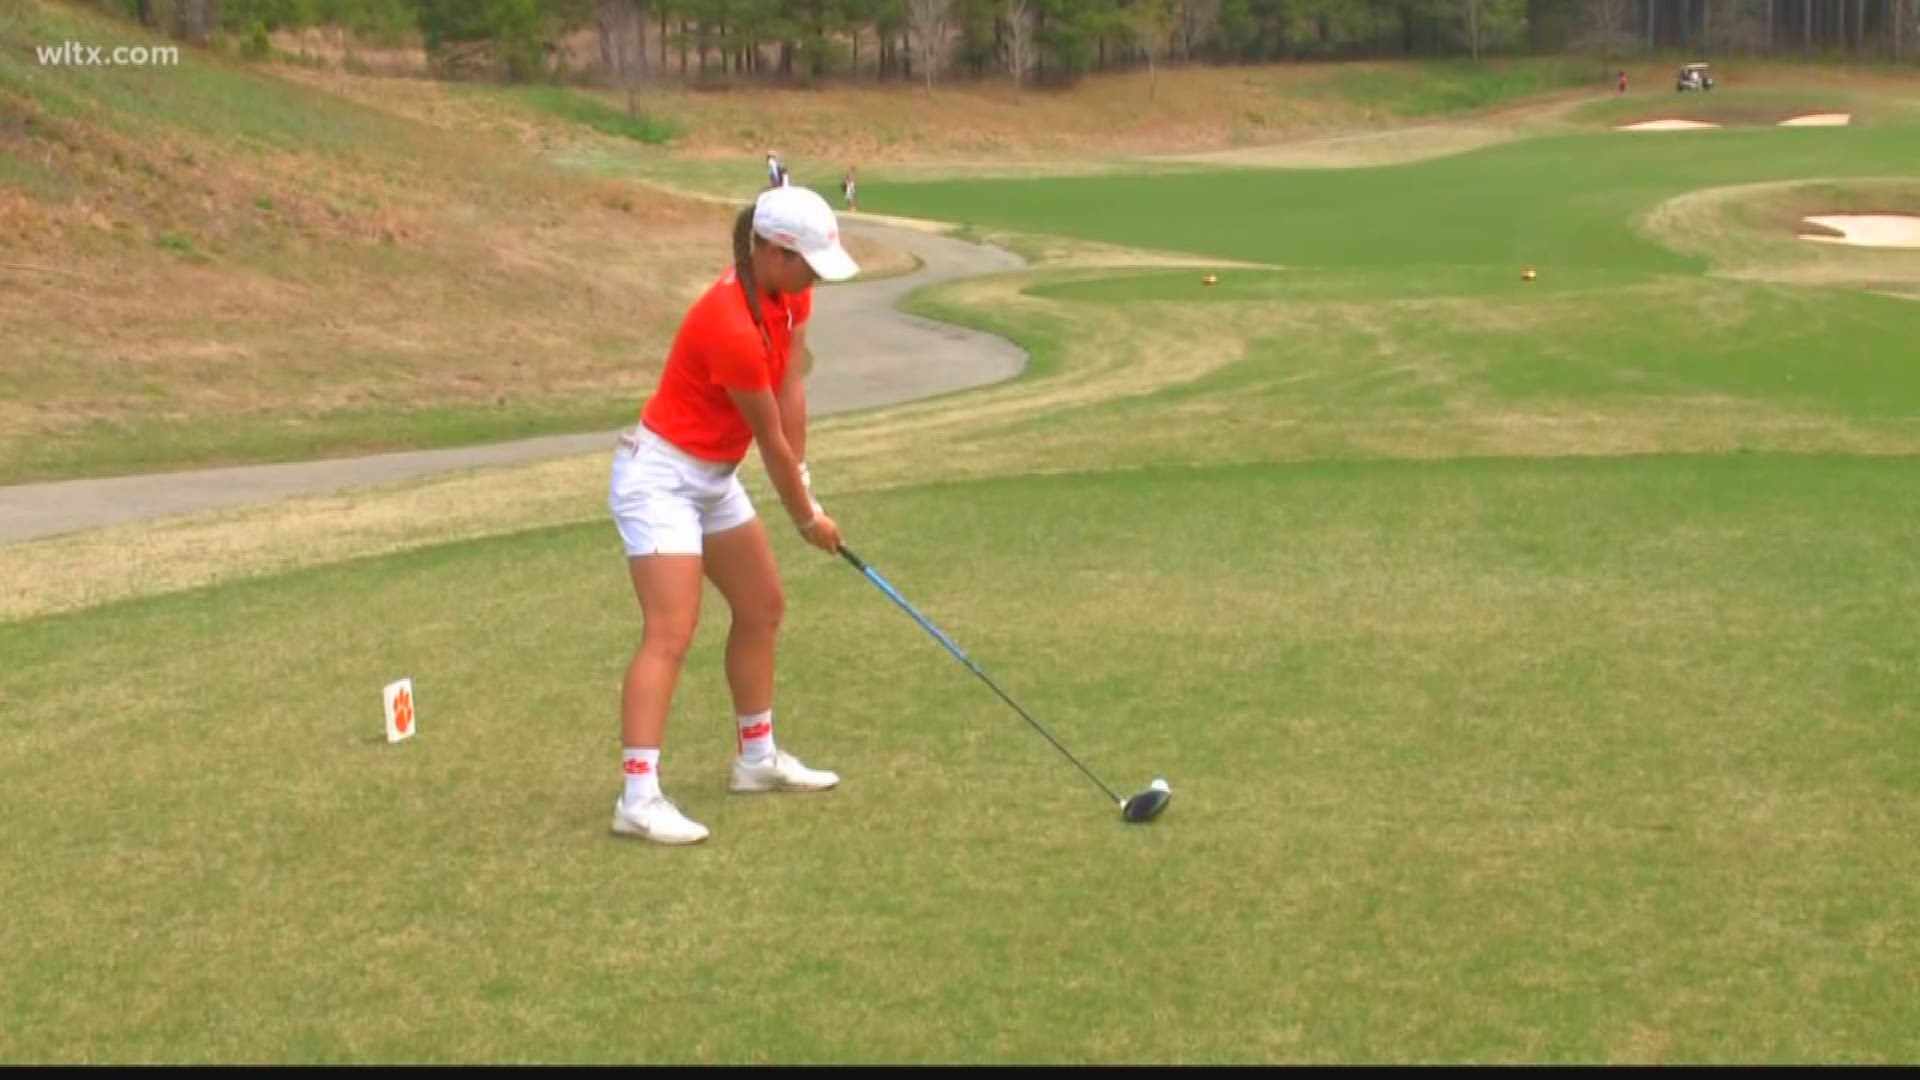 Clemson freshman golfer Gracyn Burgess will tee it up in her first post-season event - the ACC Championship in Greensboro